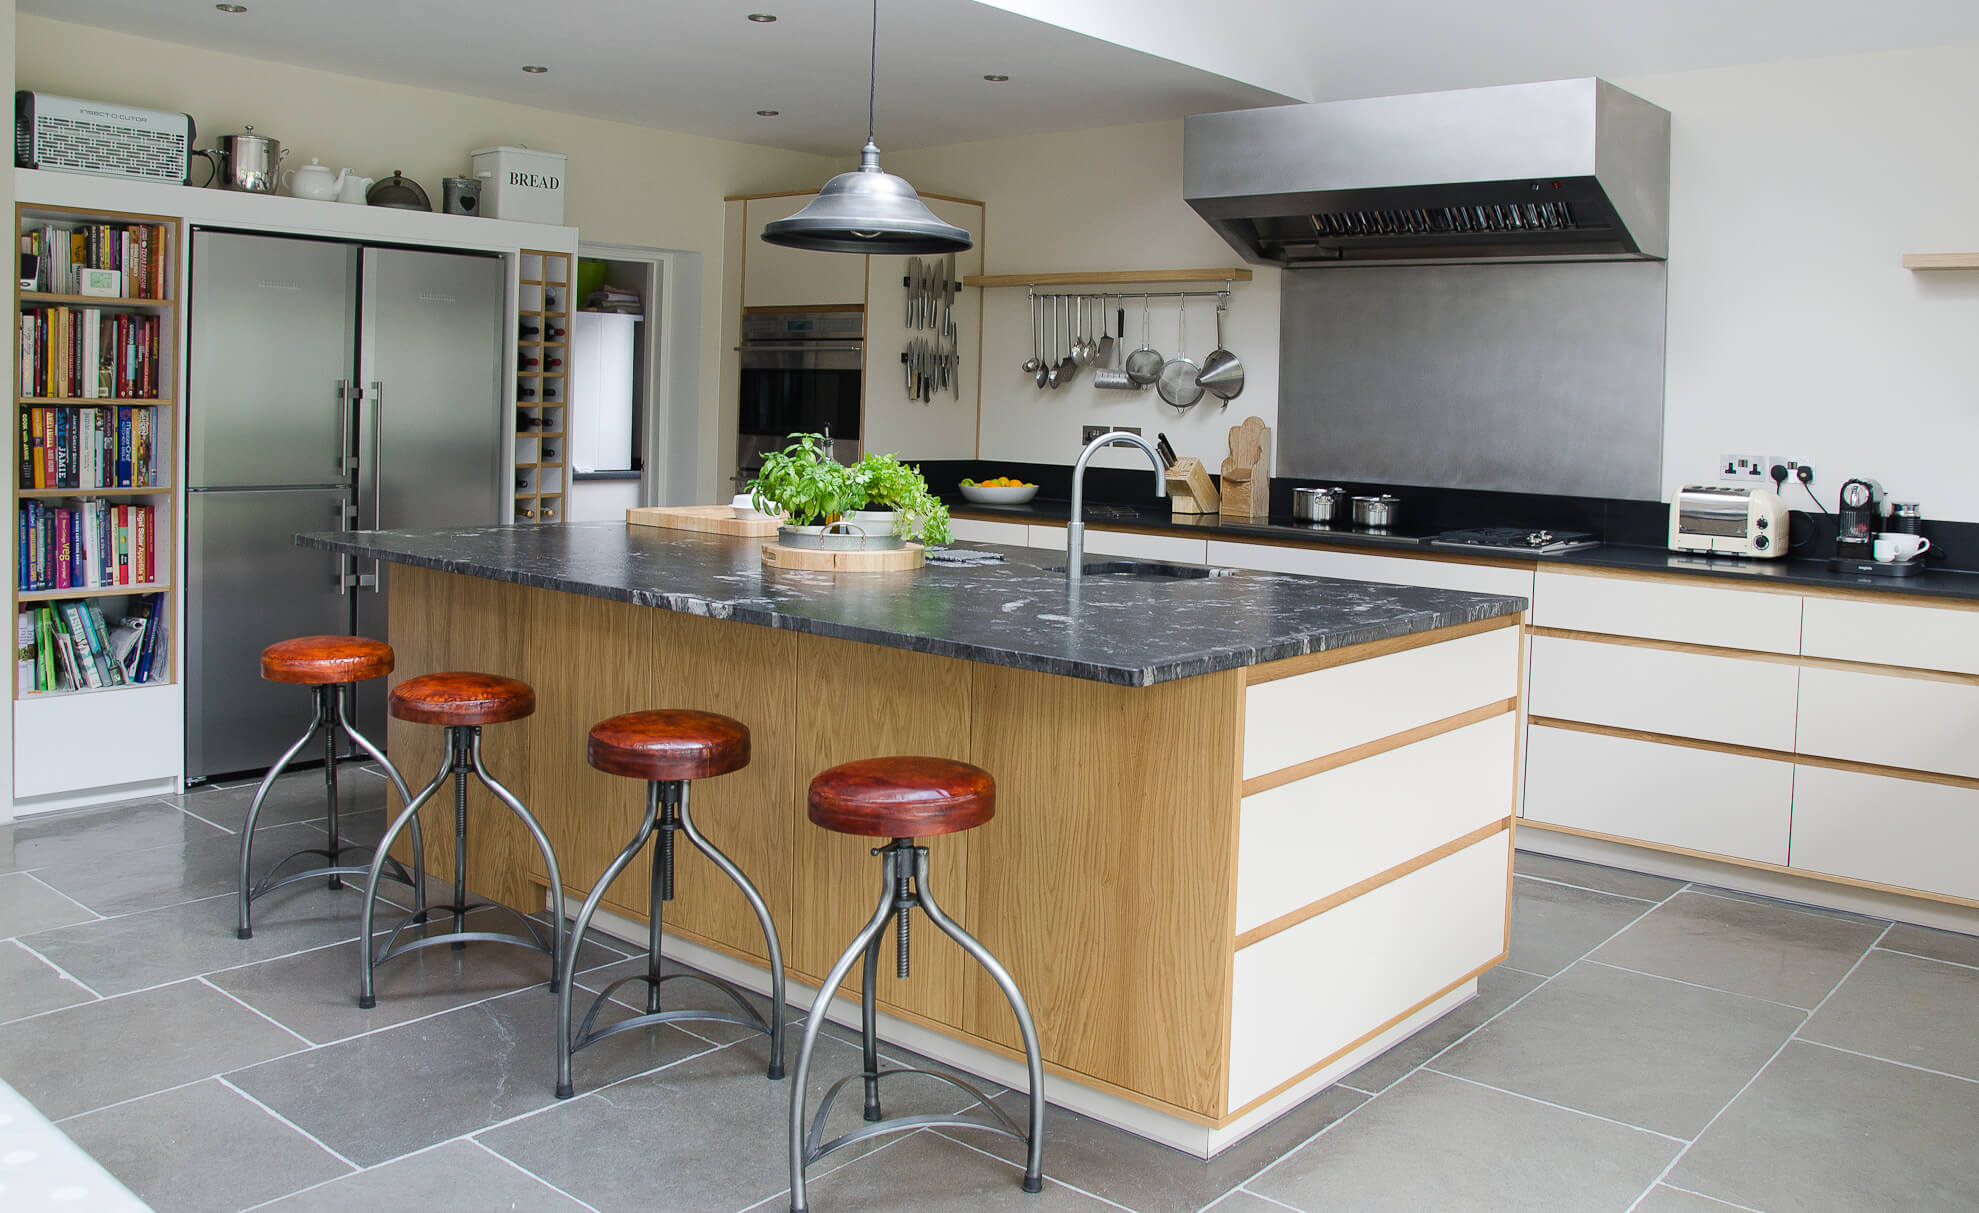 Heath Drive large hand made bespoke kitchen with birch plywood and laminate fronts, marble worktops and oak details made in Whitstable, Kent.